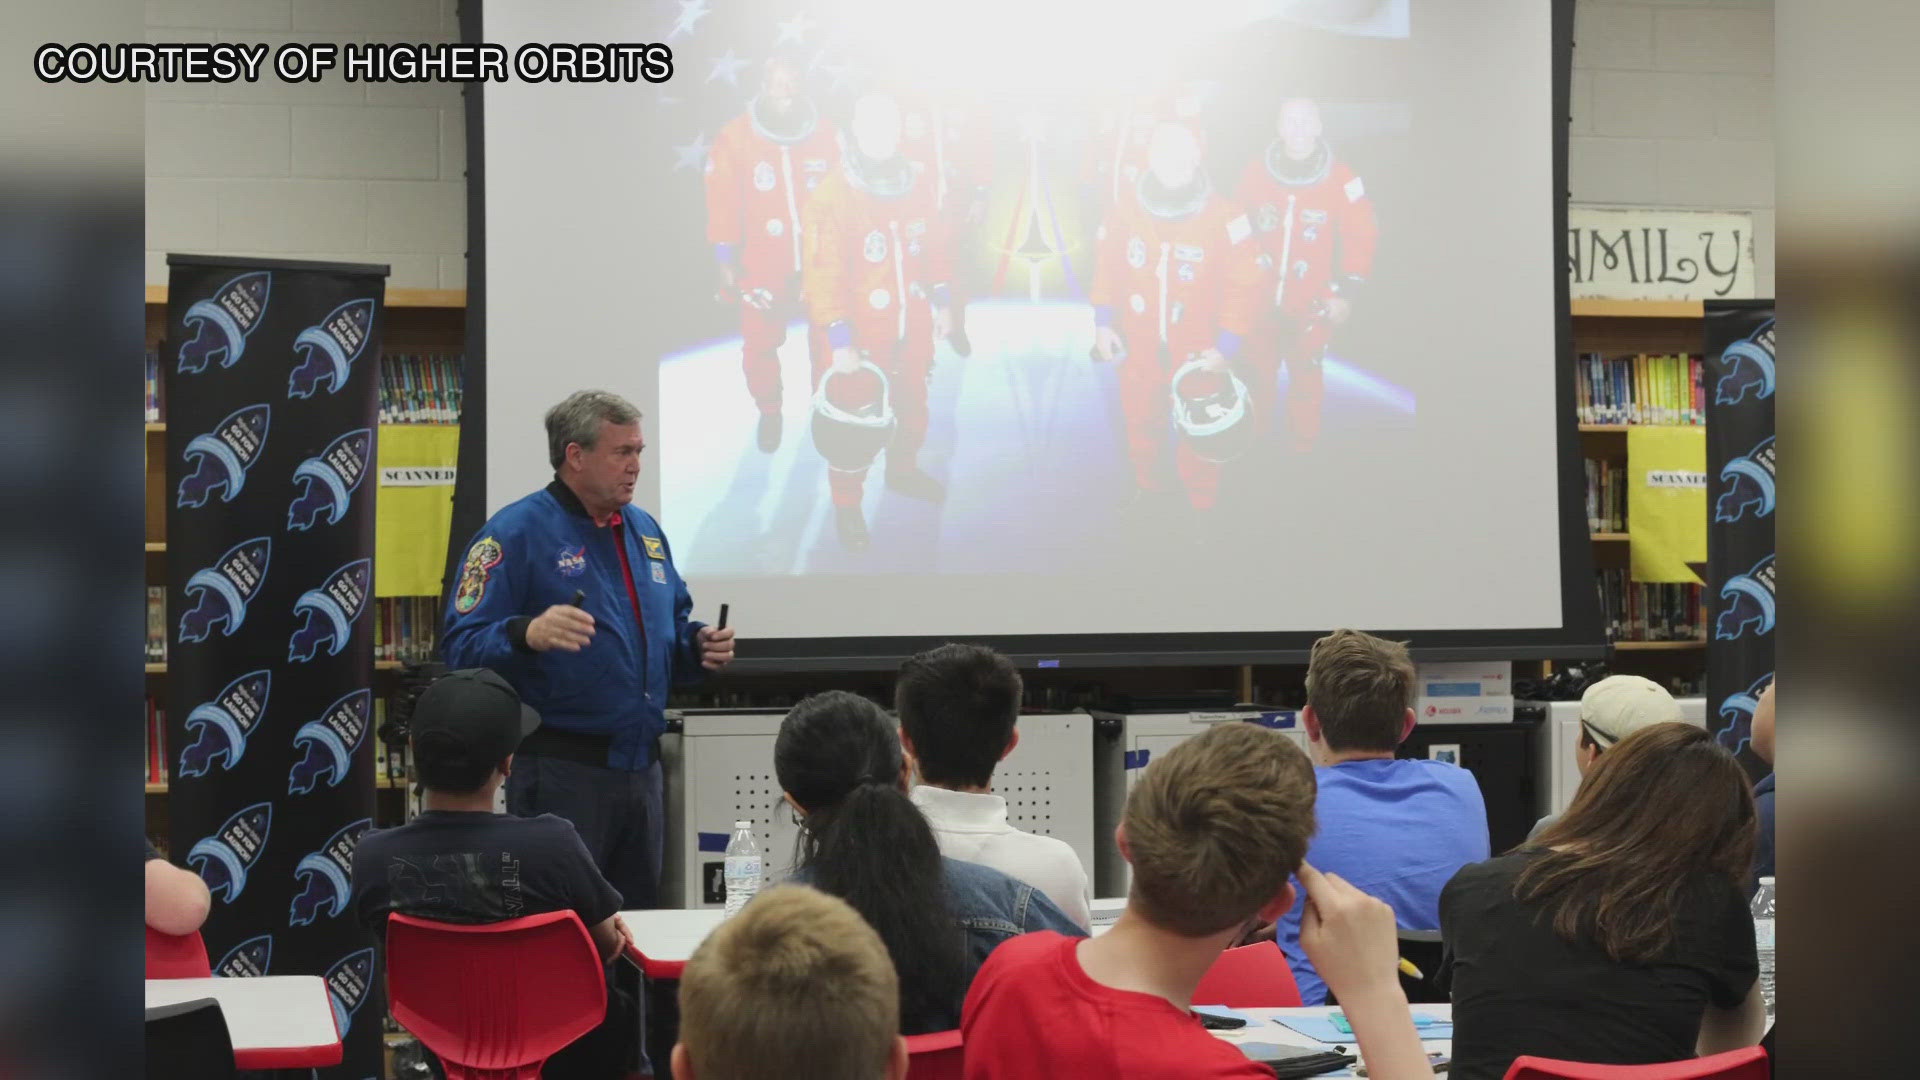 Go for Launch is a multi-day space inspired STEM event where students work with an astronaut and compete to have their science flown to the space station.